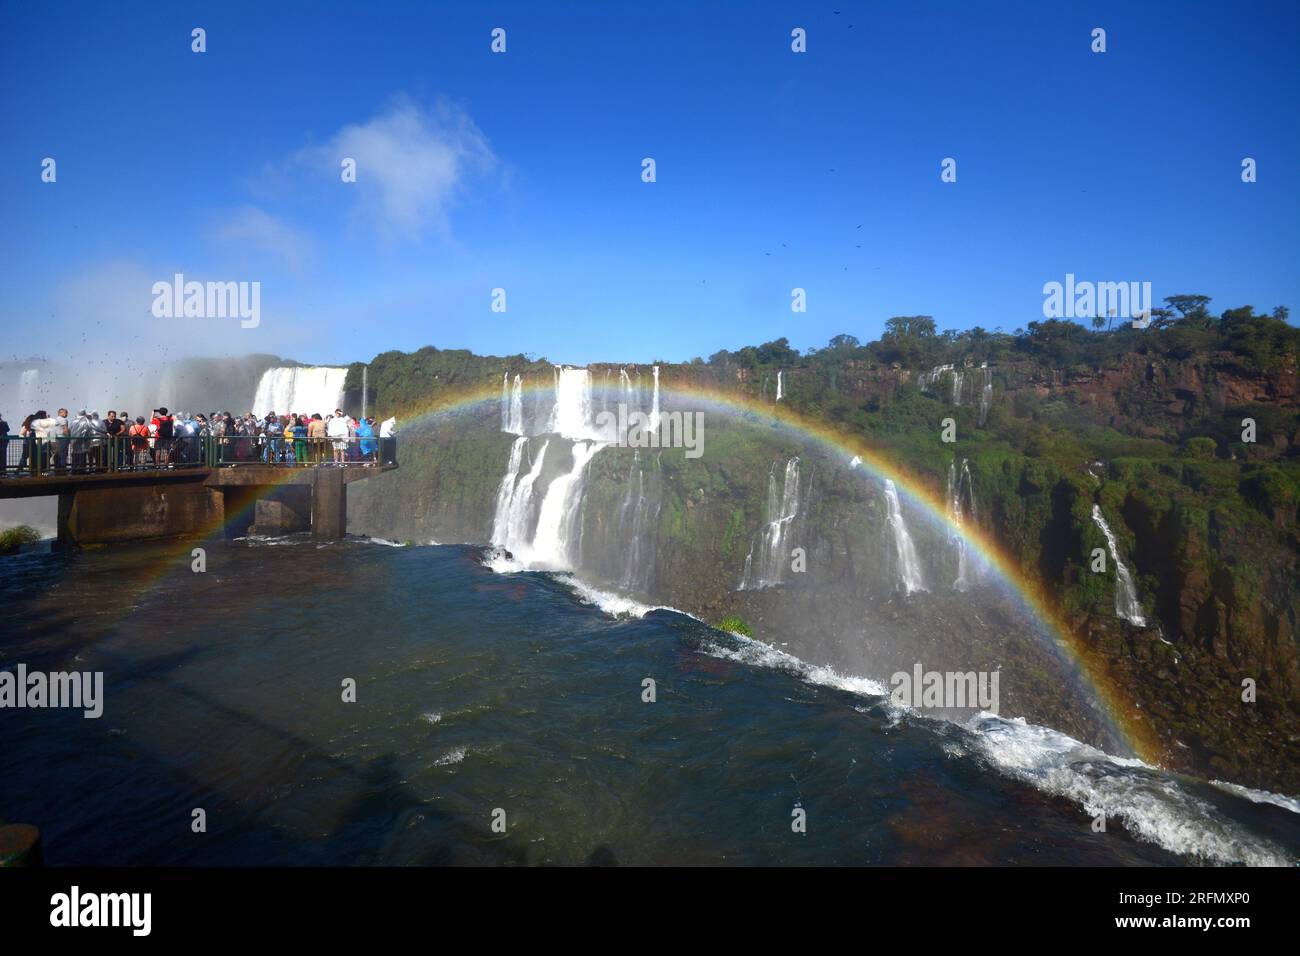 Tourists at Iguazu Falls, one of the great natural wonders of the world, on the border of Brazil and Argentina. Rainbow in the foreground Stock Photo